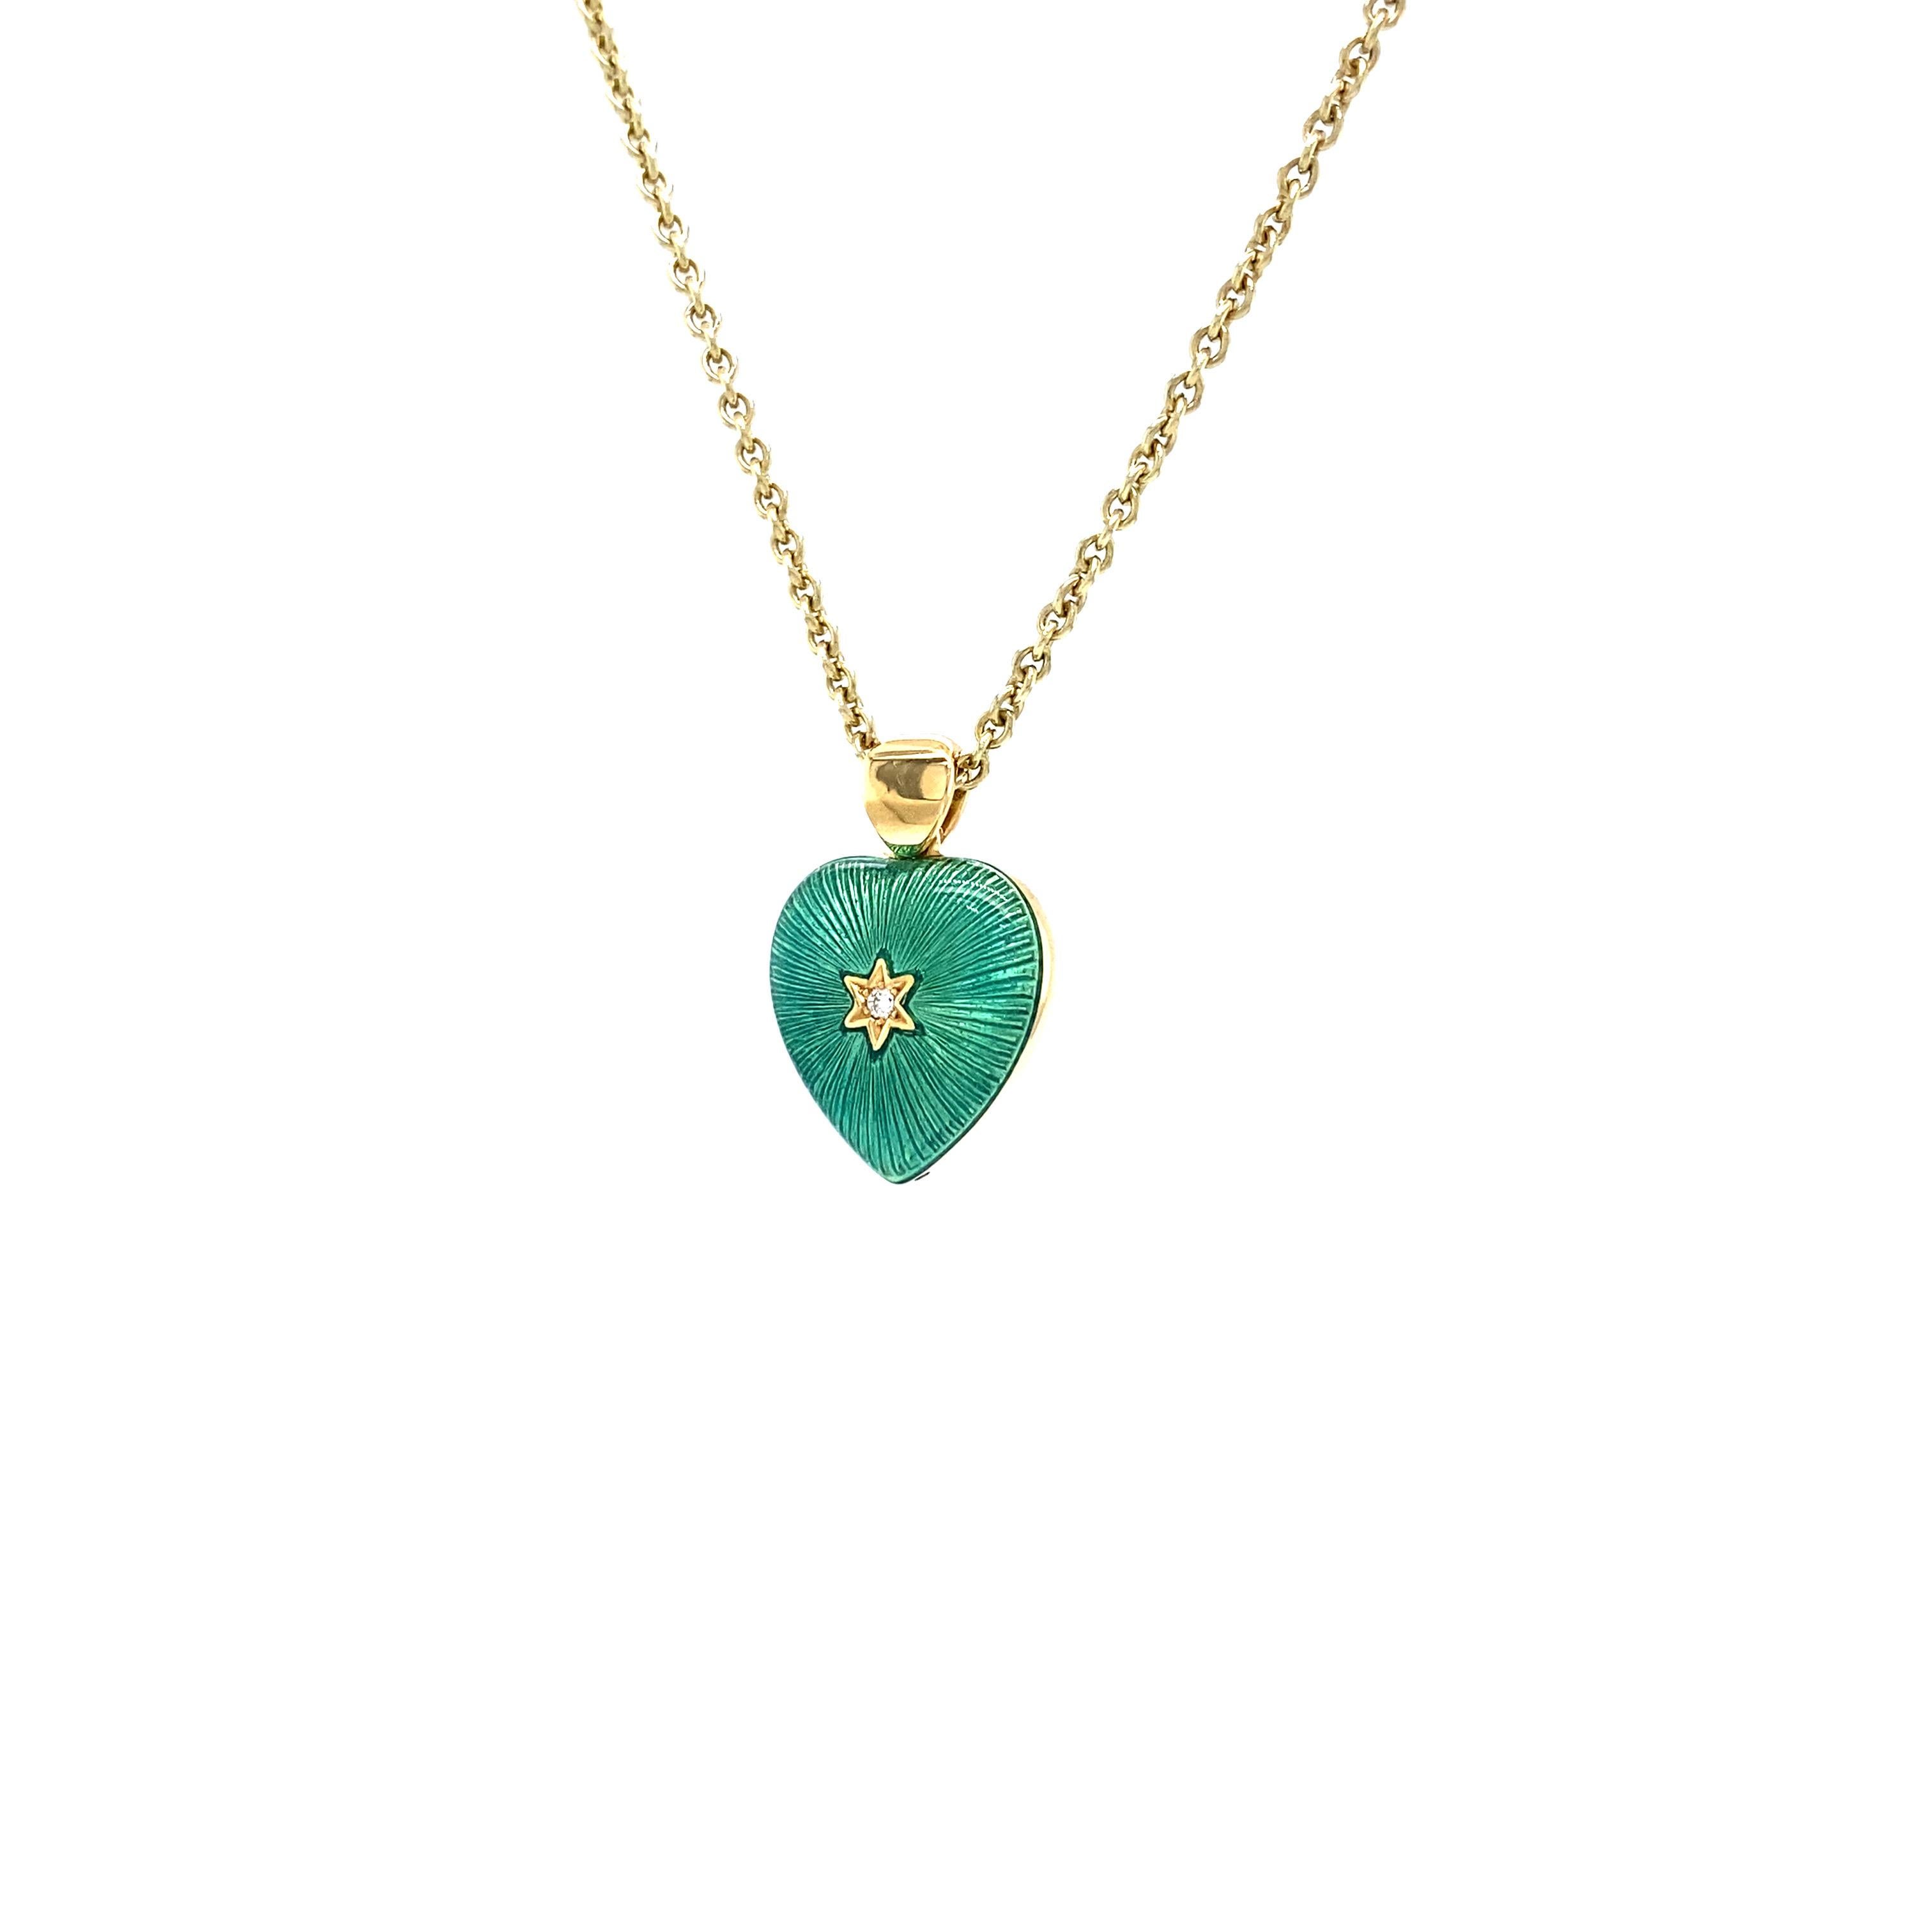 Two Colored Heart Pendant 18k Yellow Gold Turquoise/Green Enamel Diamonds 2.02ct For Sale 2